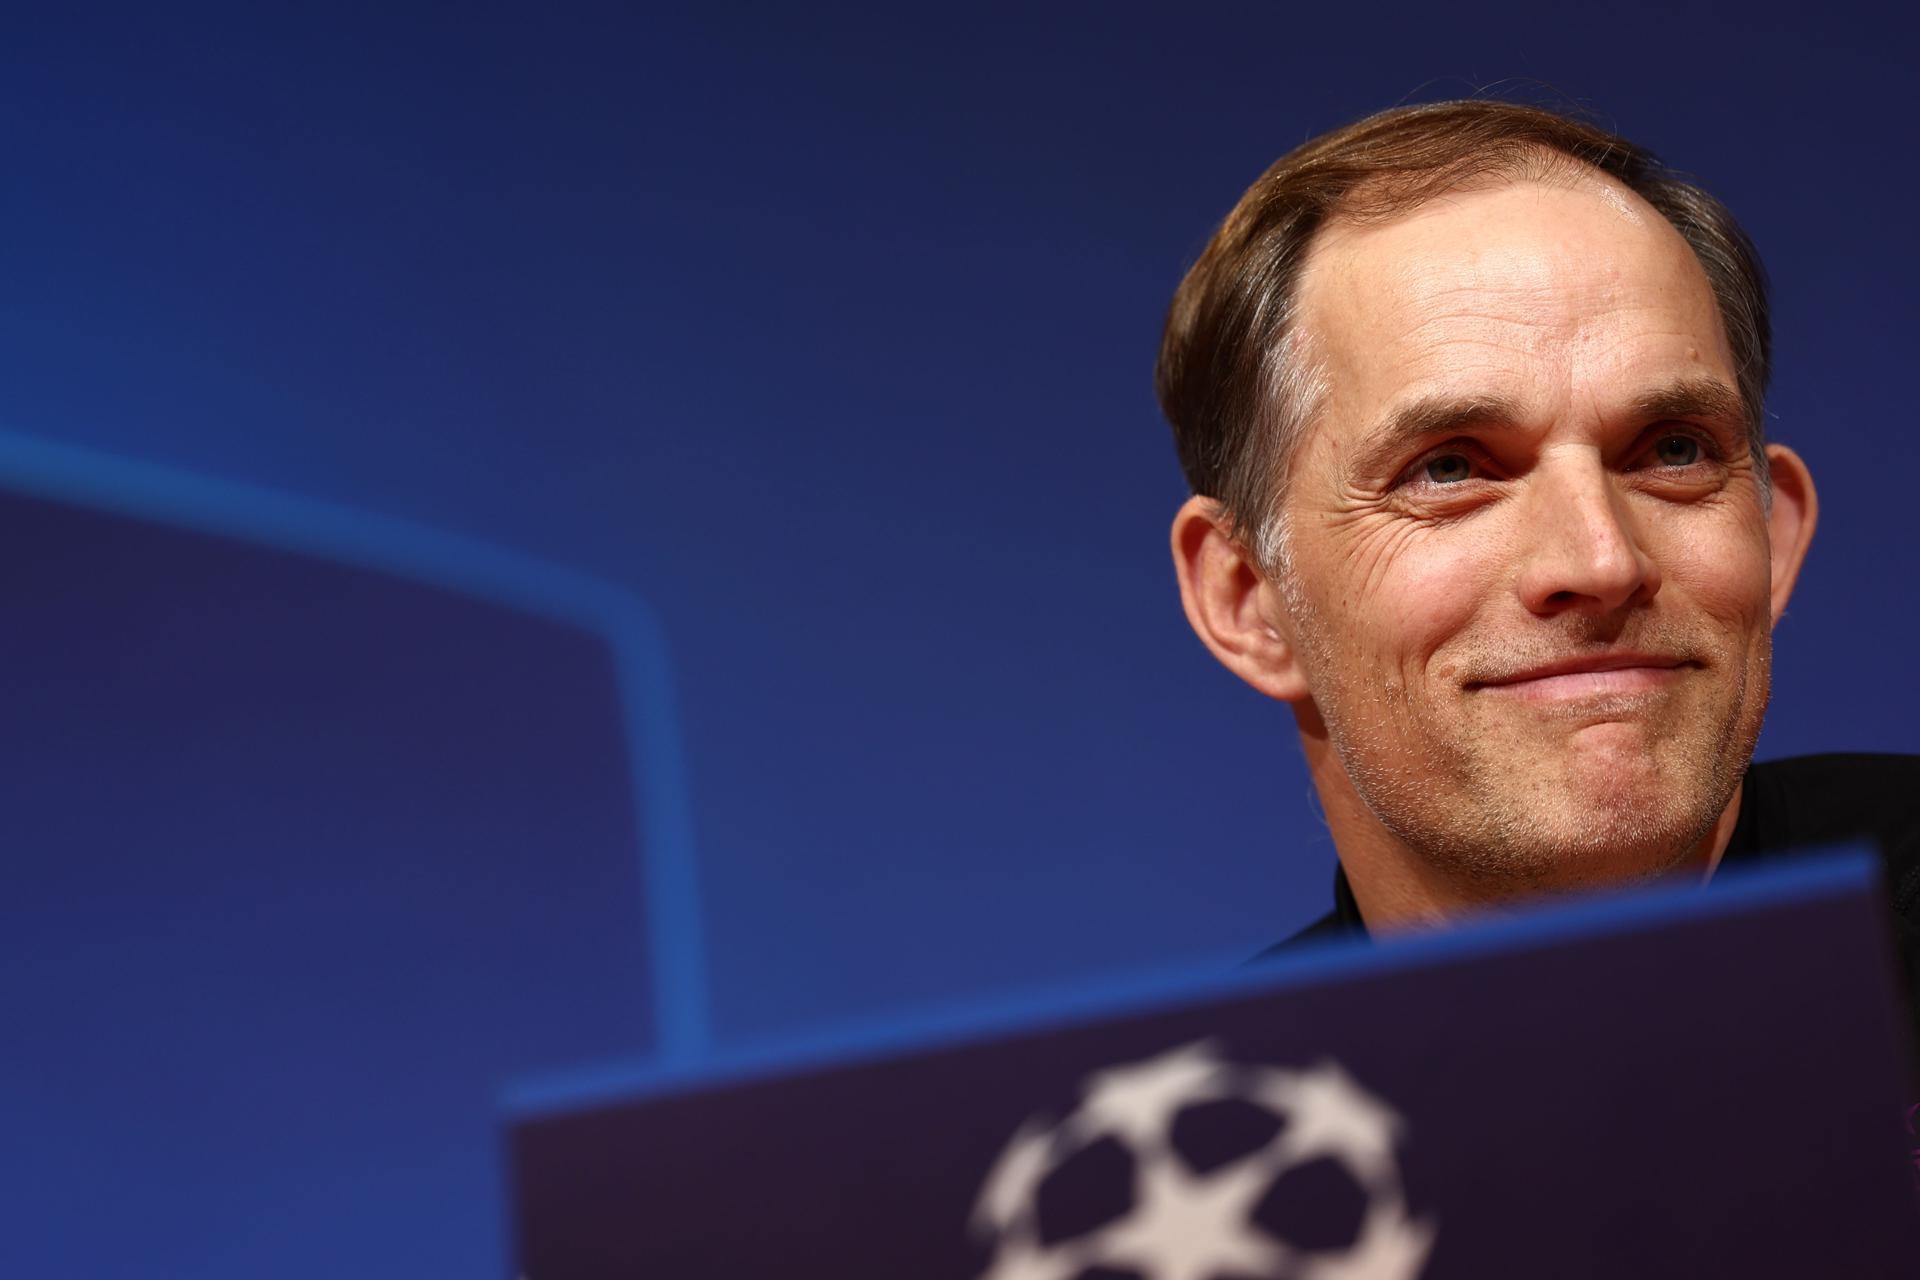 Thomas Tuchel has a contract with Bayern until 2025. EFE